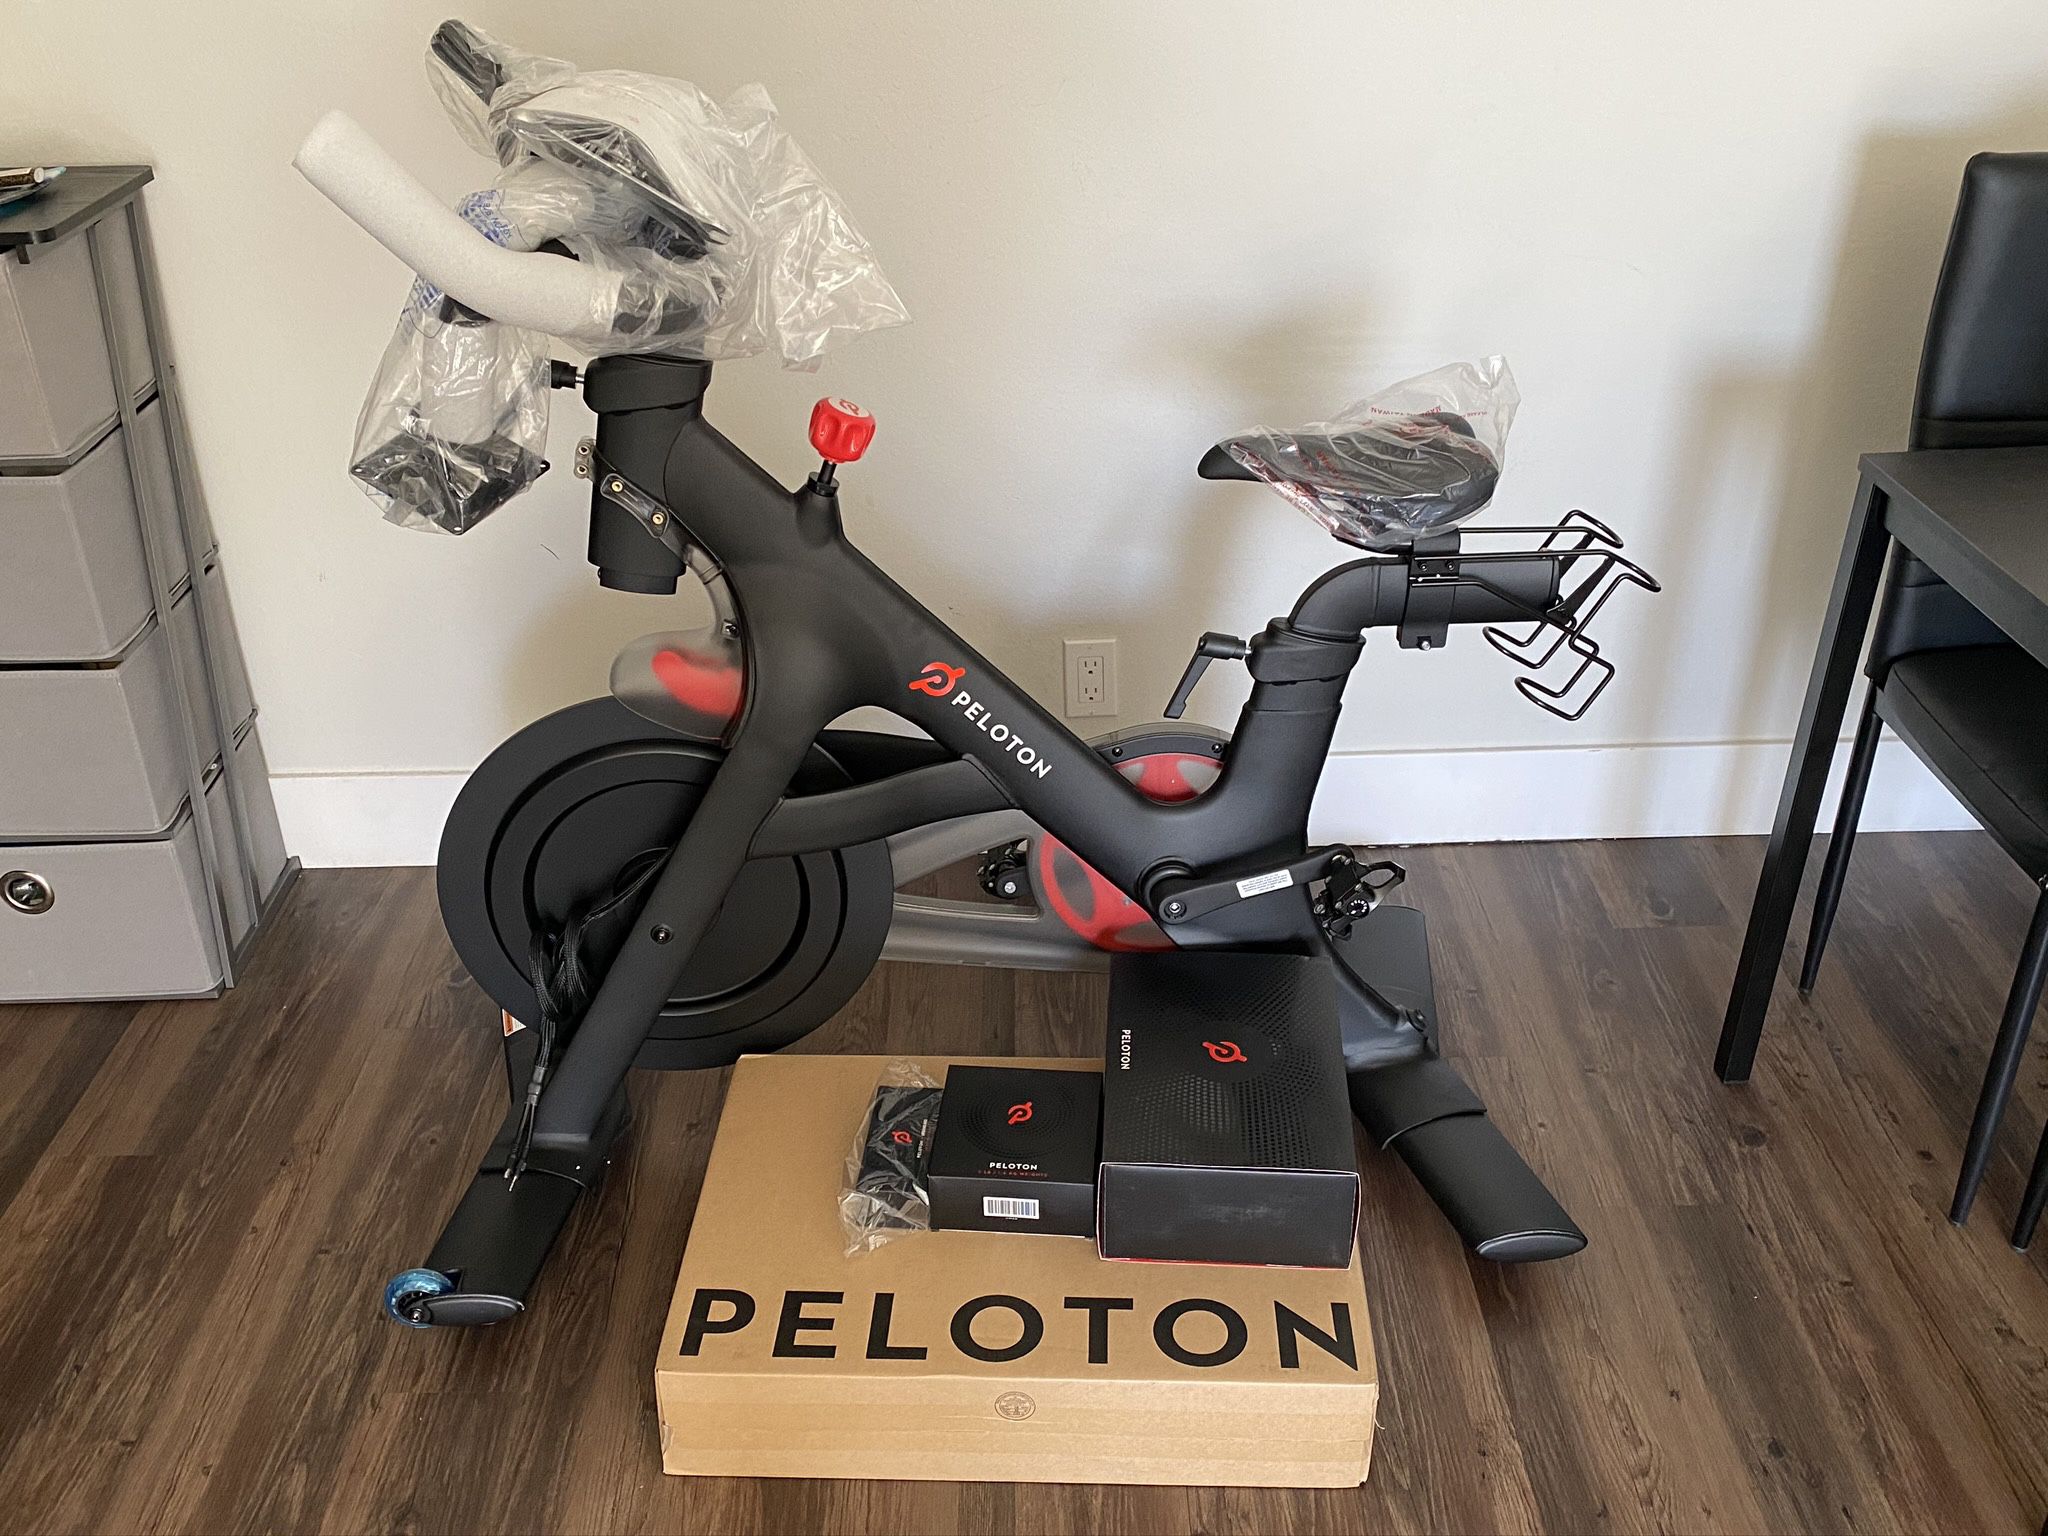 New 2023 Original Peloton (w/ shoes/weights/earbuds) - used ZERO times